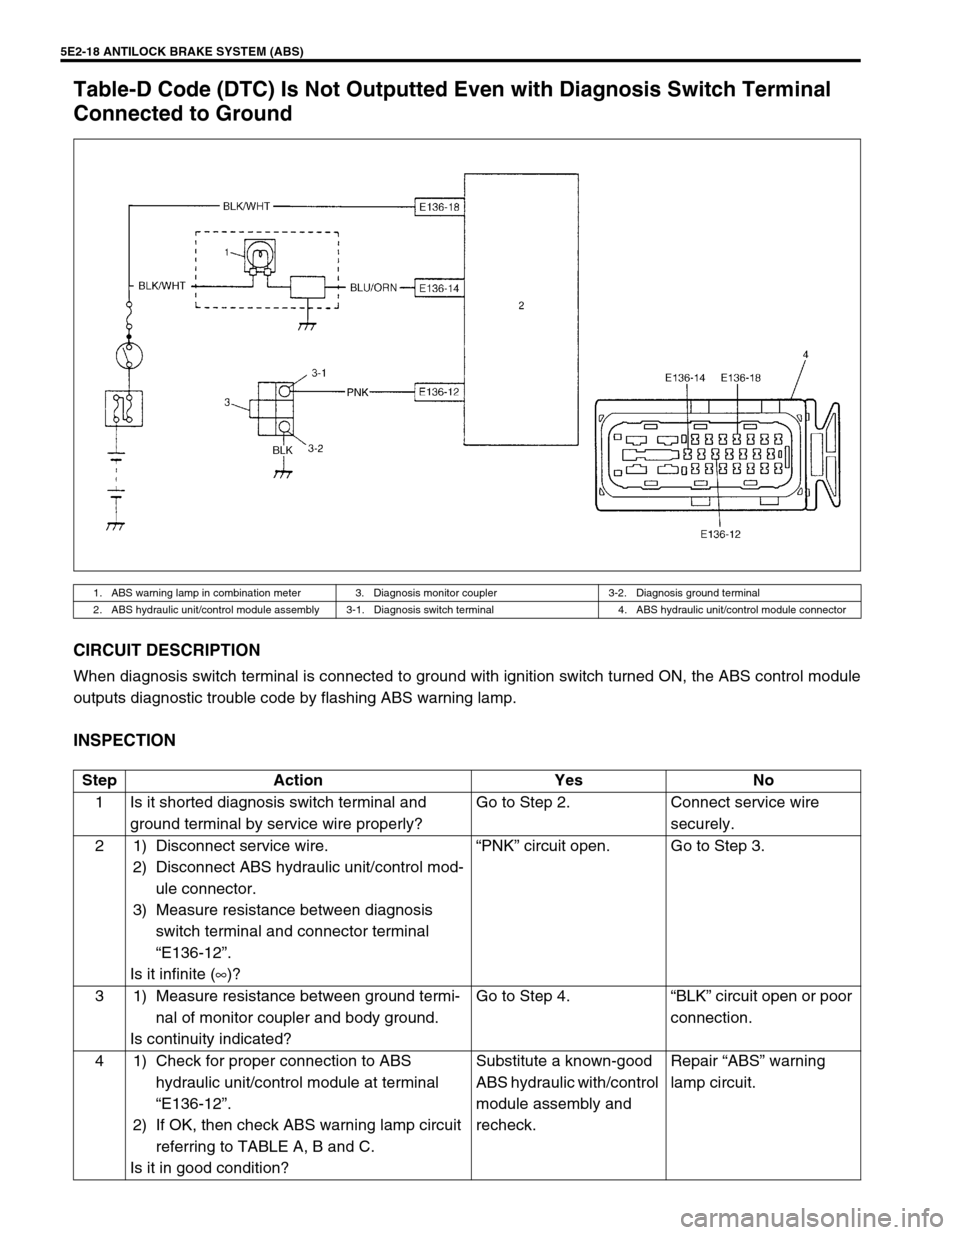 SUZUKI GRAND VITARA 2001 2.G Owners Guide 5E2-18 ANTILOCK BRAKE SYSTEM (ABS)
Table-D Code (DTC) Is Not Outputted Even with Diagnosis Switch Terminal 
Connected to Ground
CIRCUIT DESCRIPTION
When diagnosis switch terminal is connected to groun